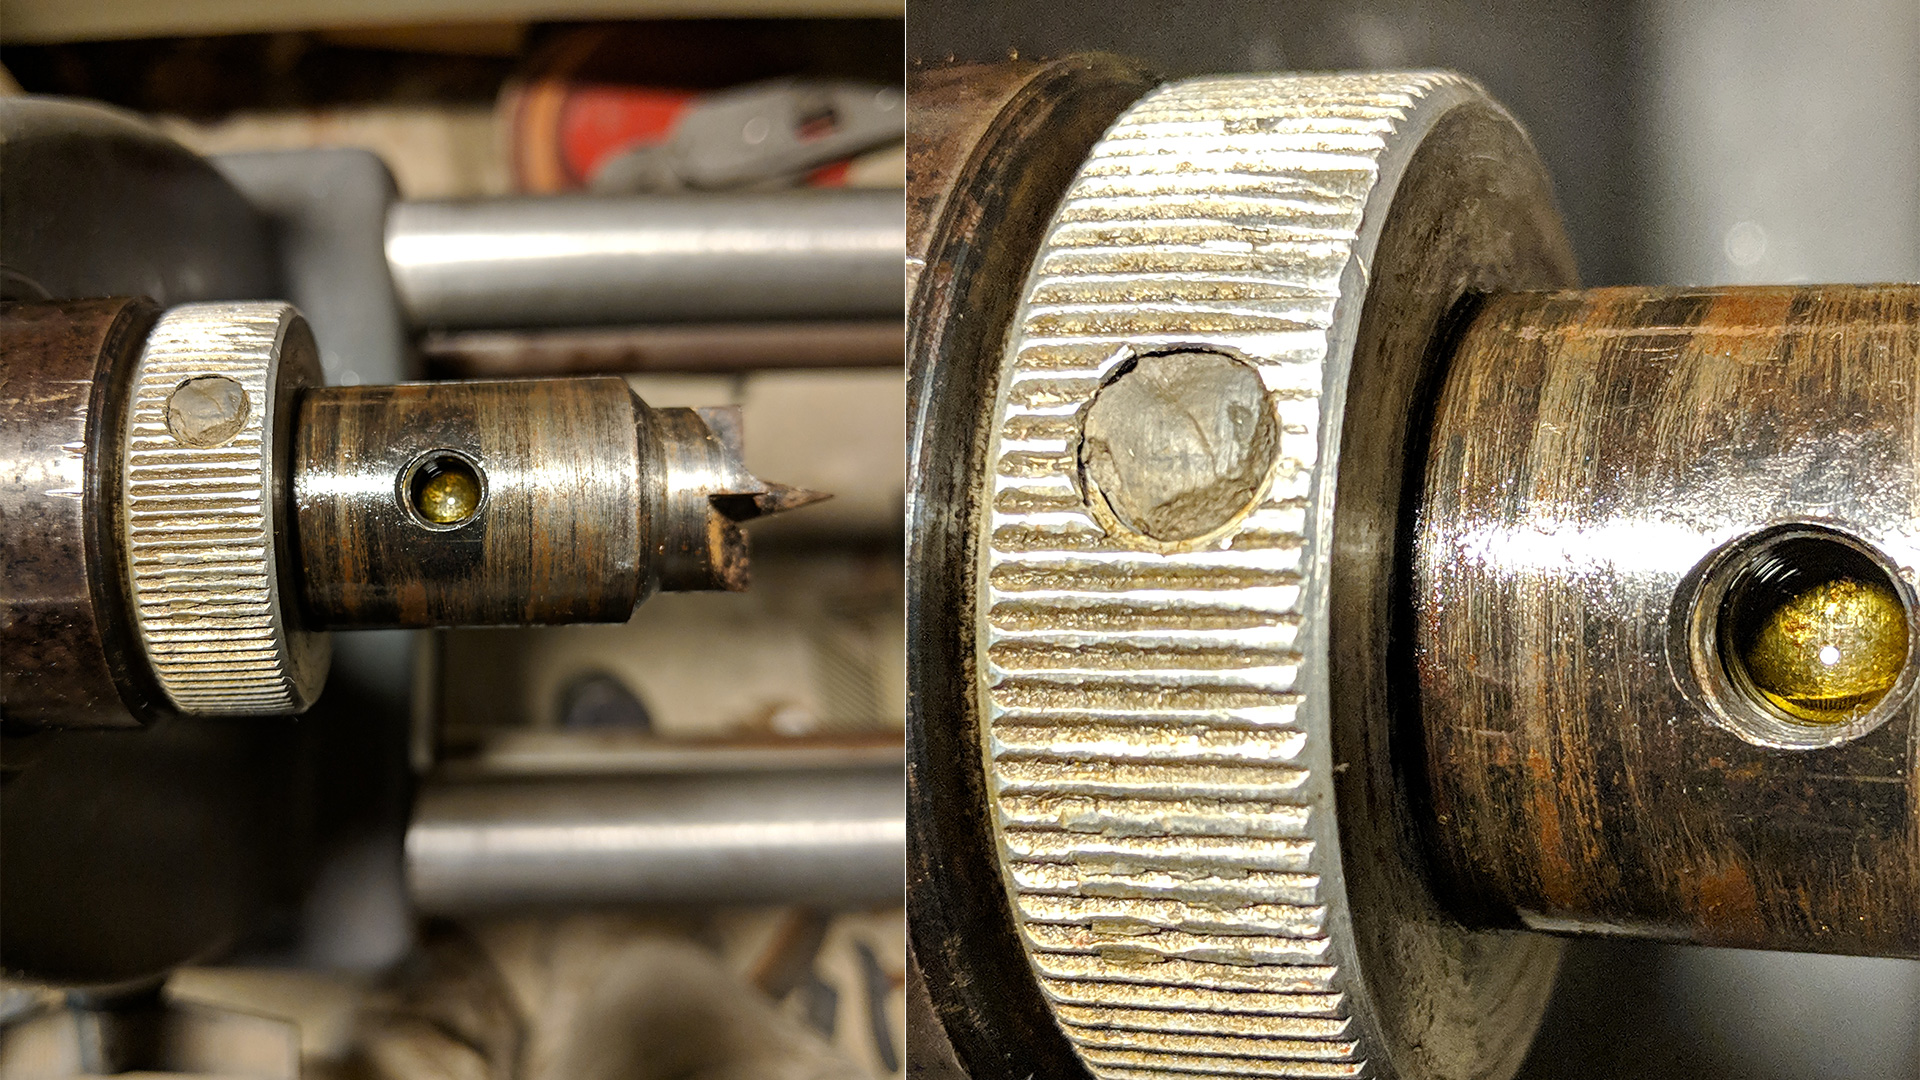 MKV 500 - Quill Spindle - Rust-welded to the lathe drive center.